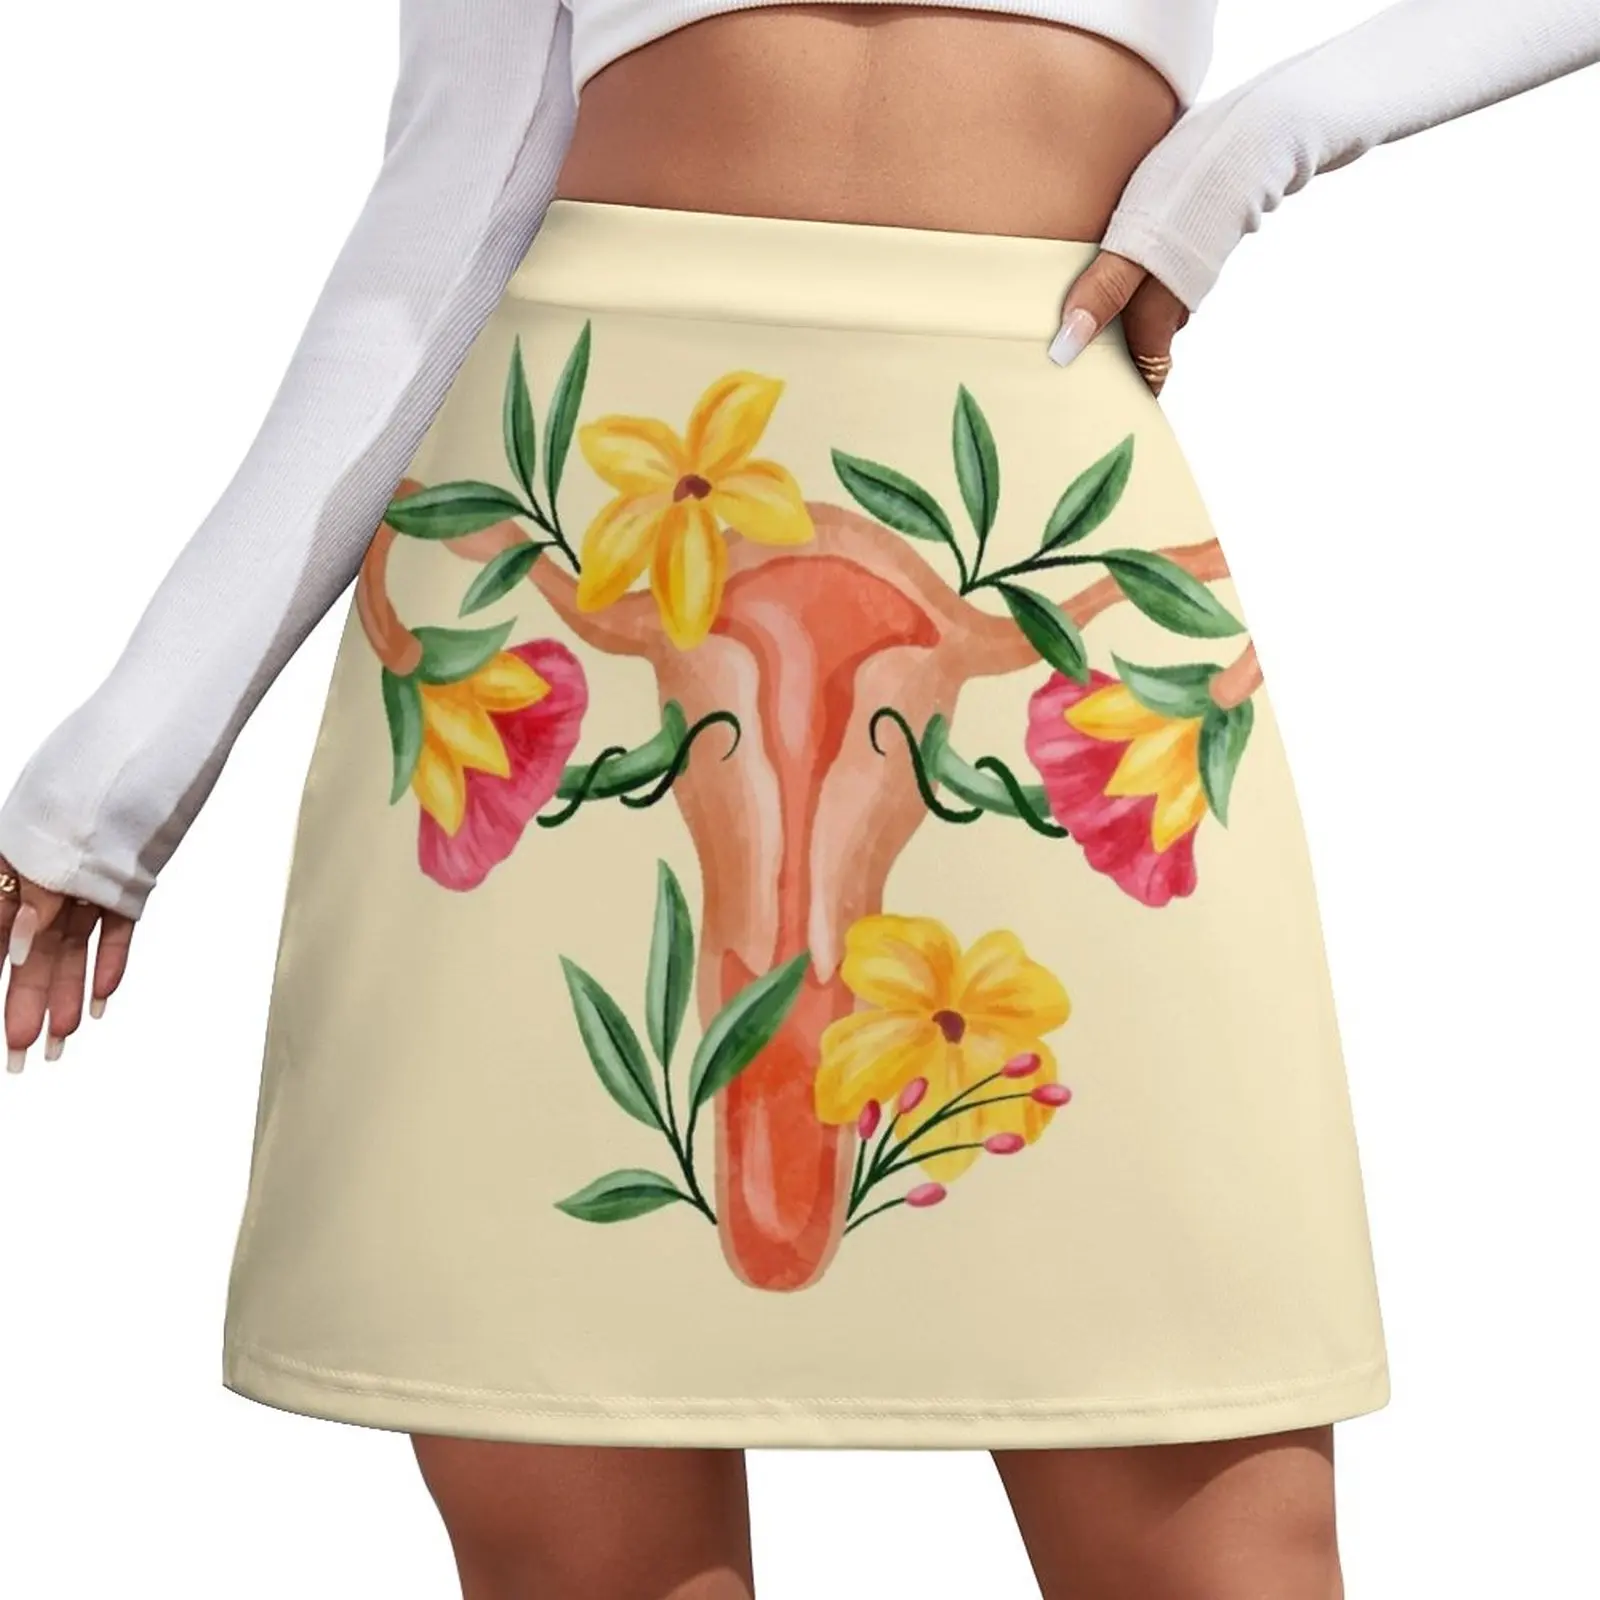 Floral Uterus and Ovaries Woman Reproductive System Mini Skirt kpop festival outfit women Women's skirt